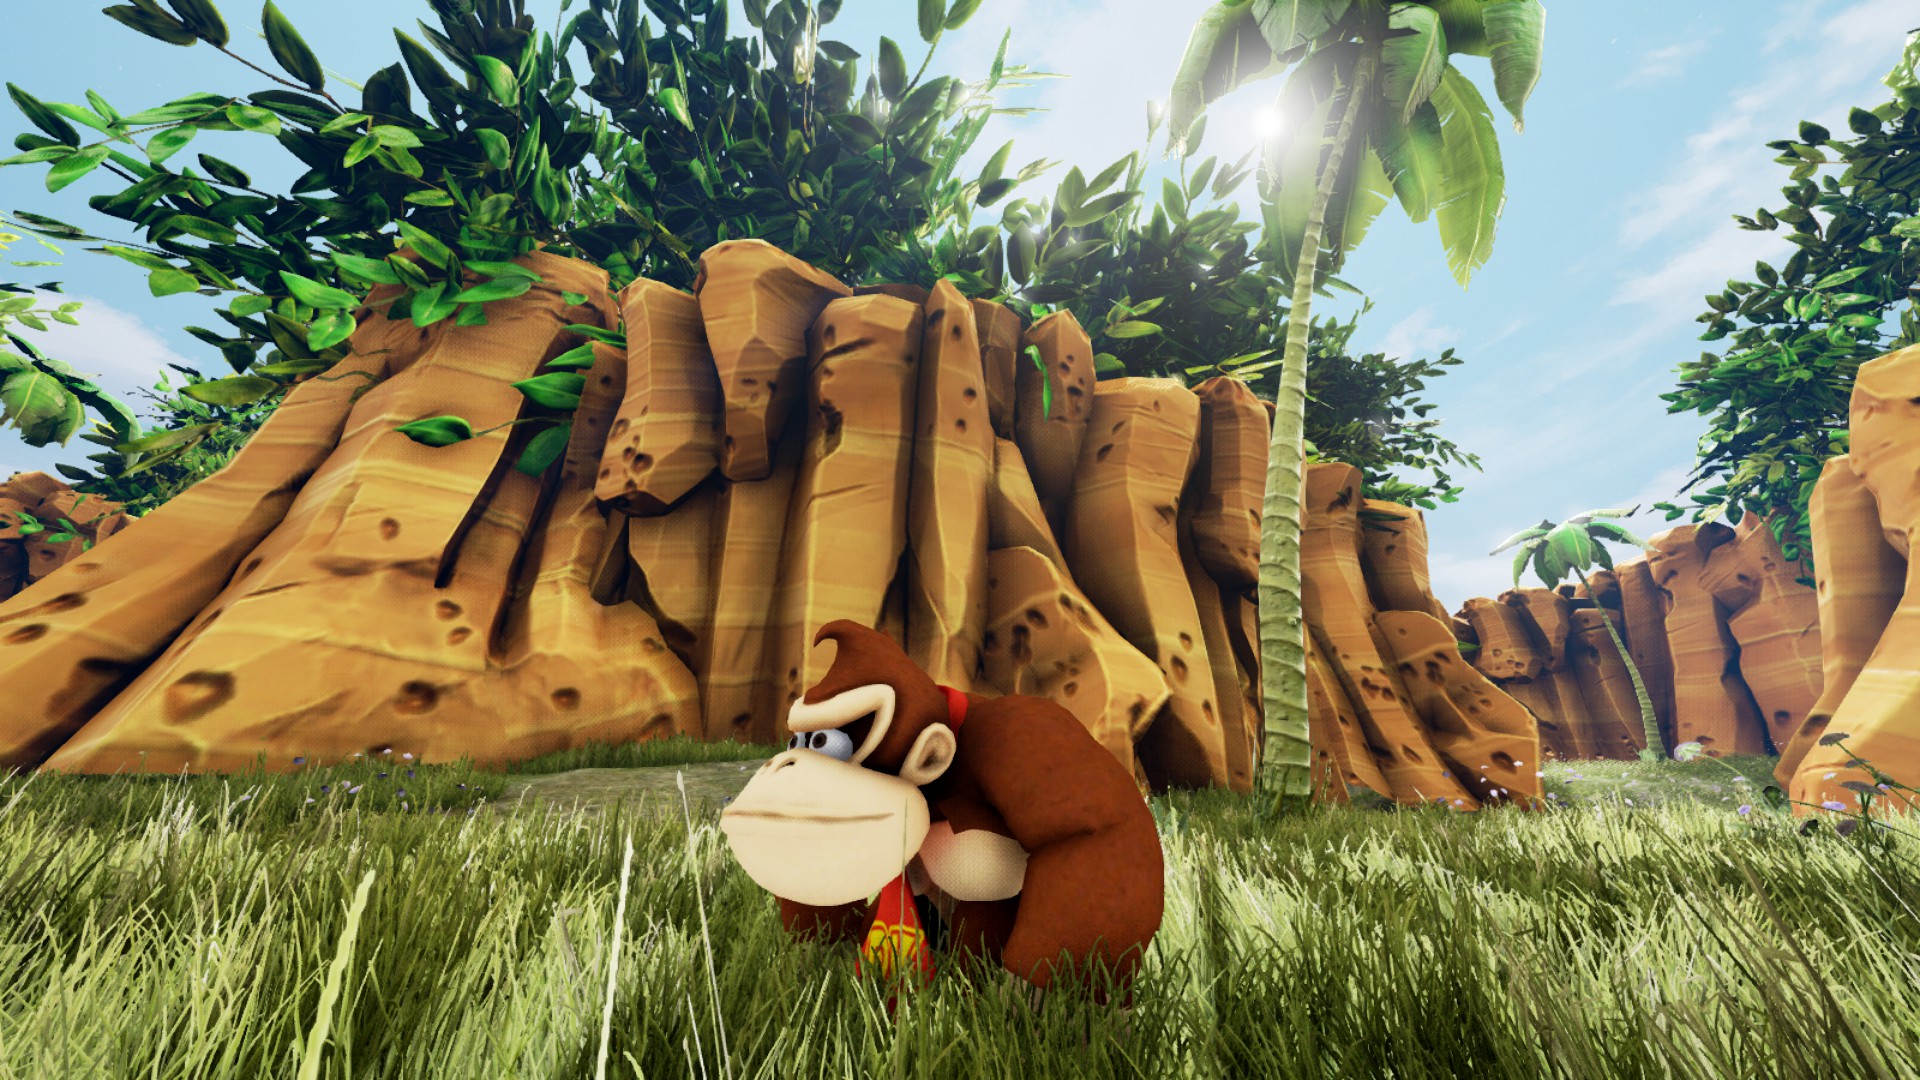 download donkey kong country 64